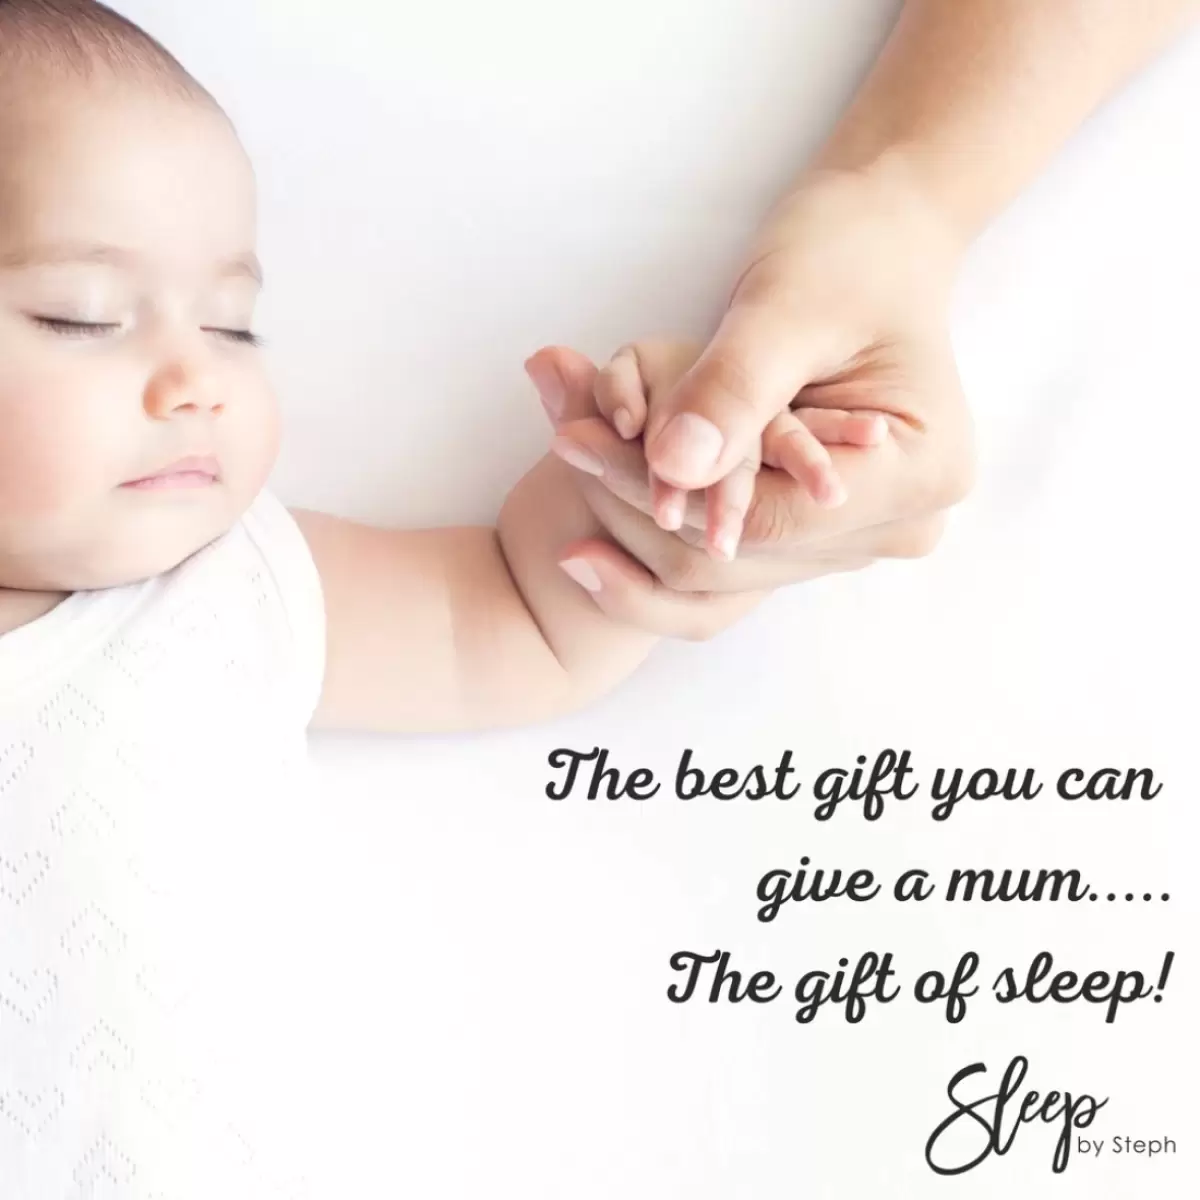 A Spa Voucher Or A Baby And Child Sleep Voucher 2